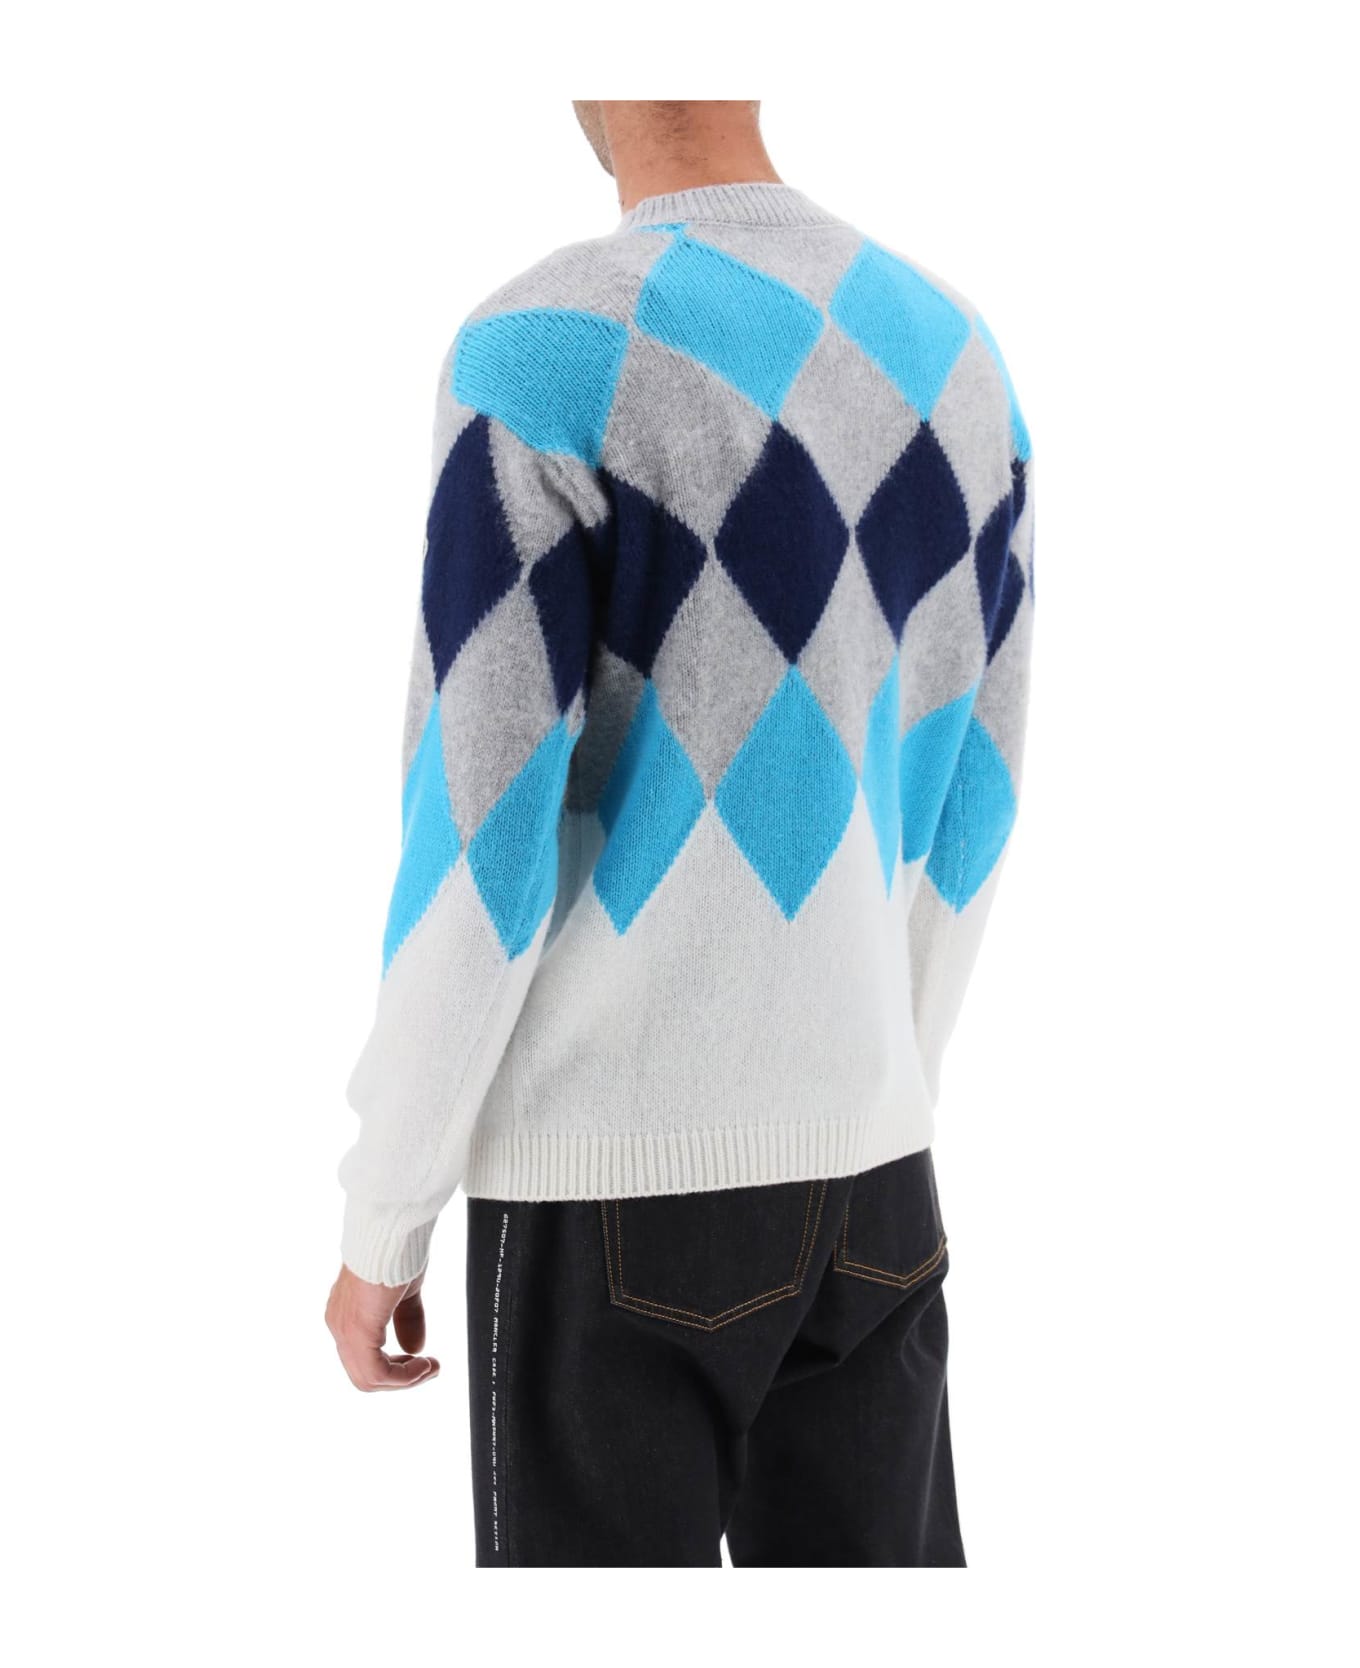 Moncler Genius Wool And Cashmere Sweater - panna ニットウェア